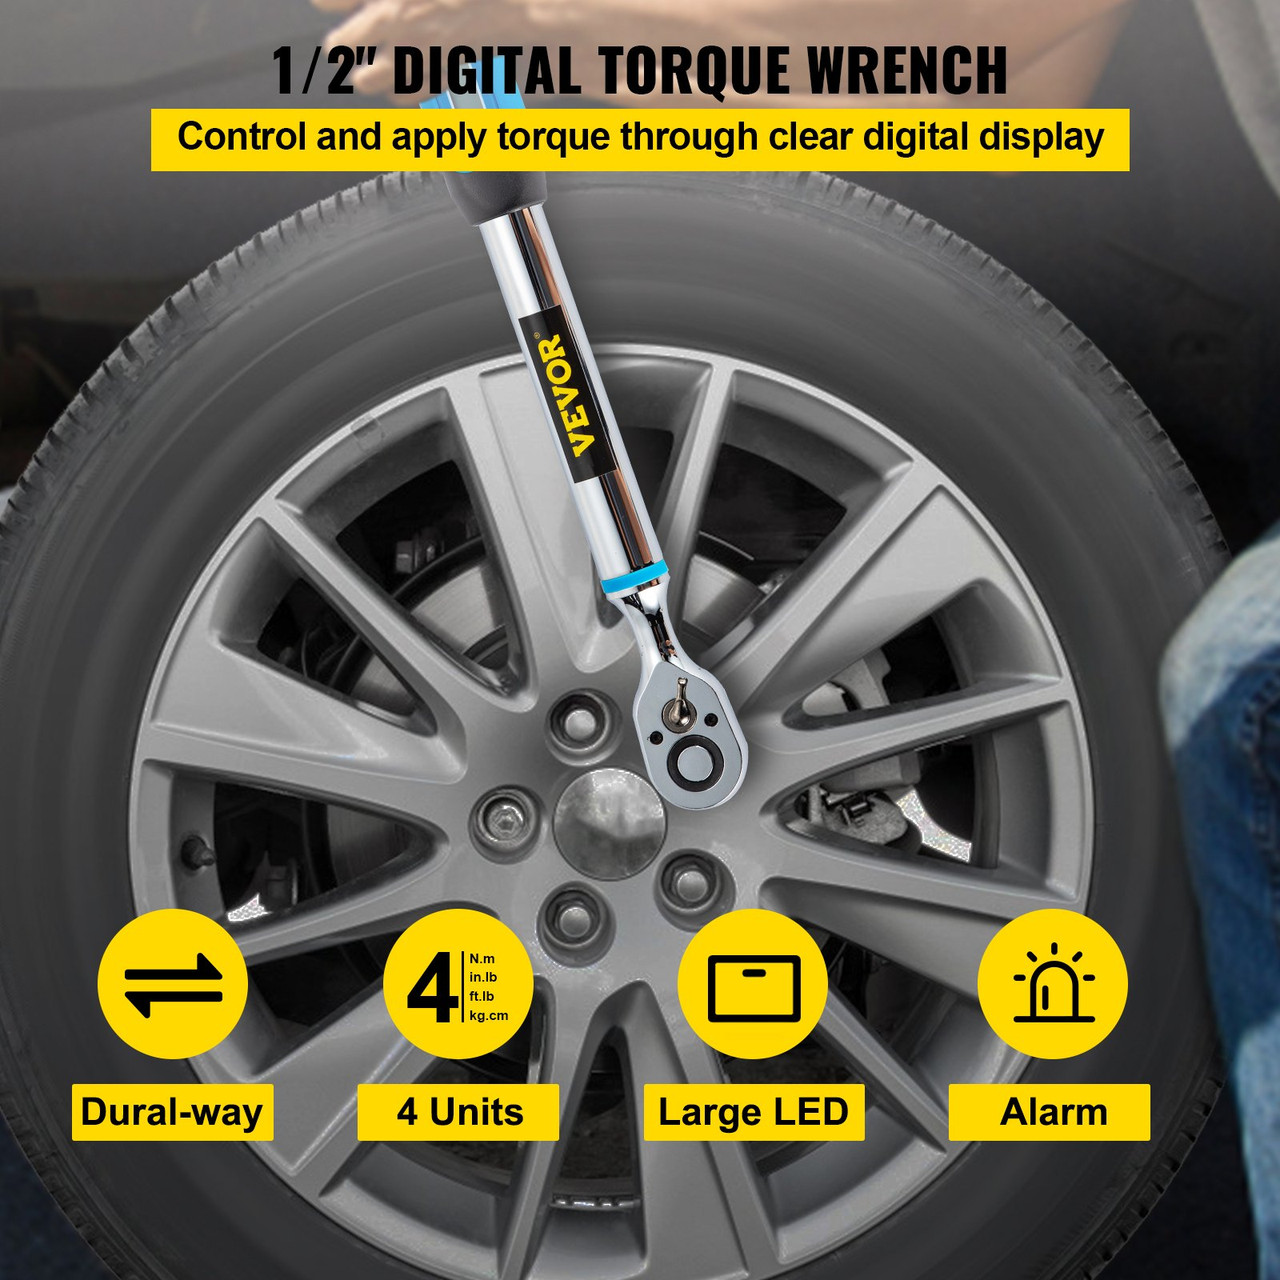 Digital Torque Wrench, 1/2" Drive Electronic Torque Wrench, Torque Wrench Kit 7.47-147.5 ft-lb Torque Range Accurate to ñ2%, Adjustable Torque Wrench w/LED Display and Buzzer, Socket Set & Case